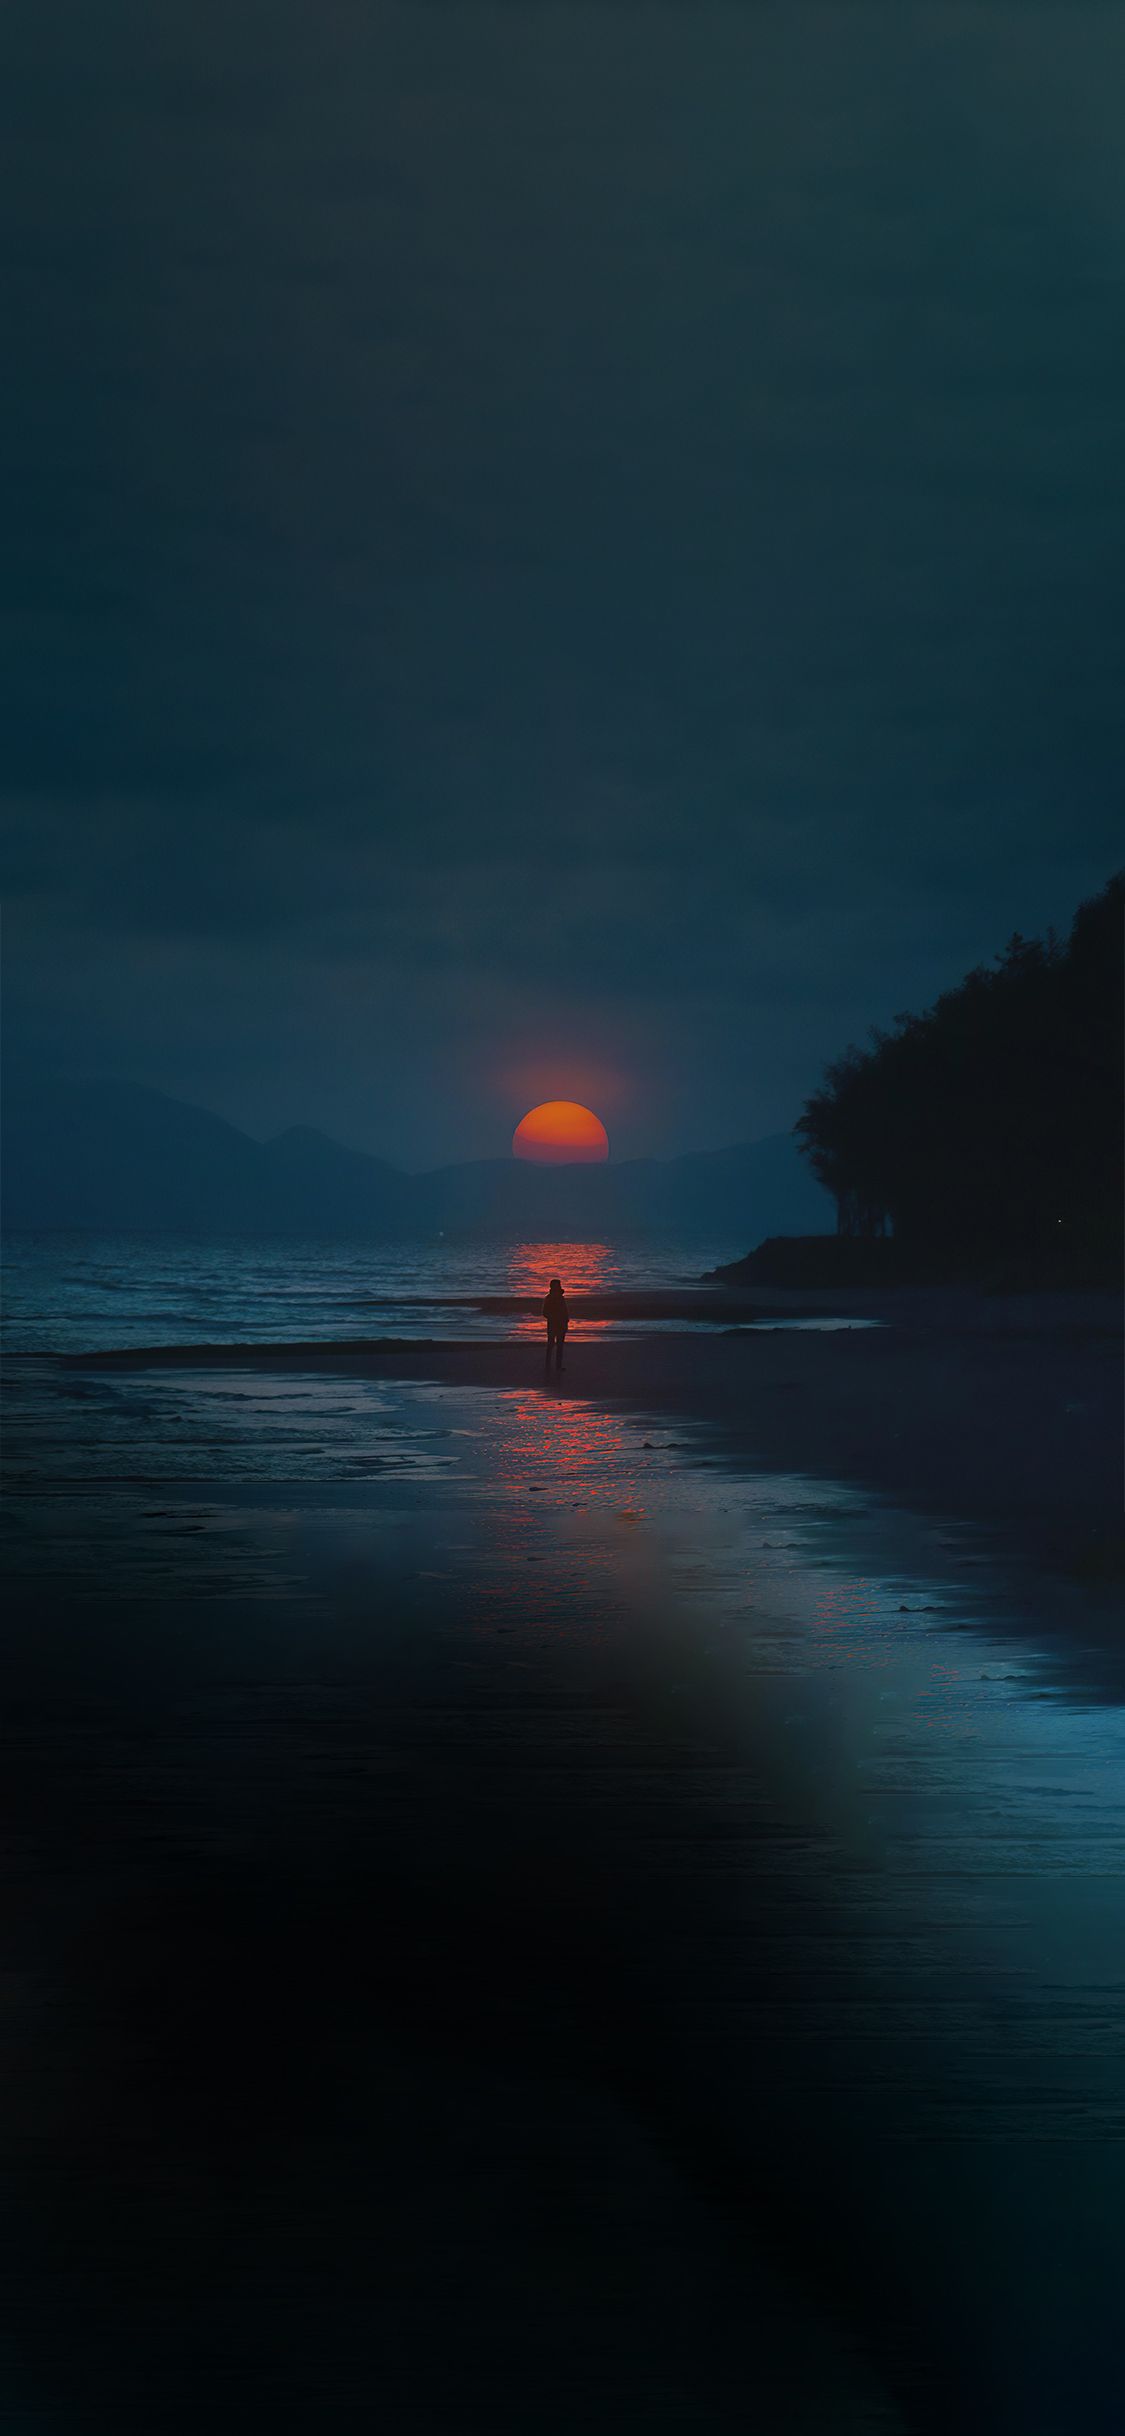 A person is walking on the beach at sunset - Sunset